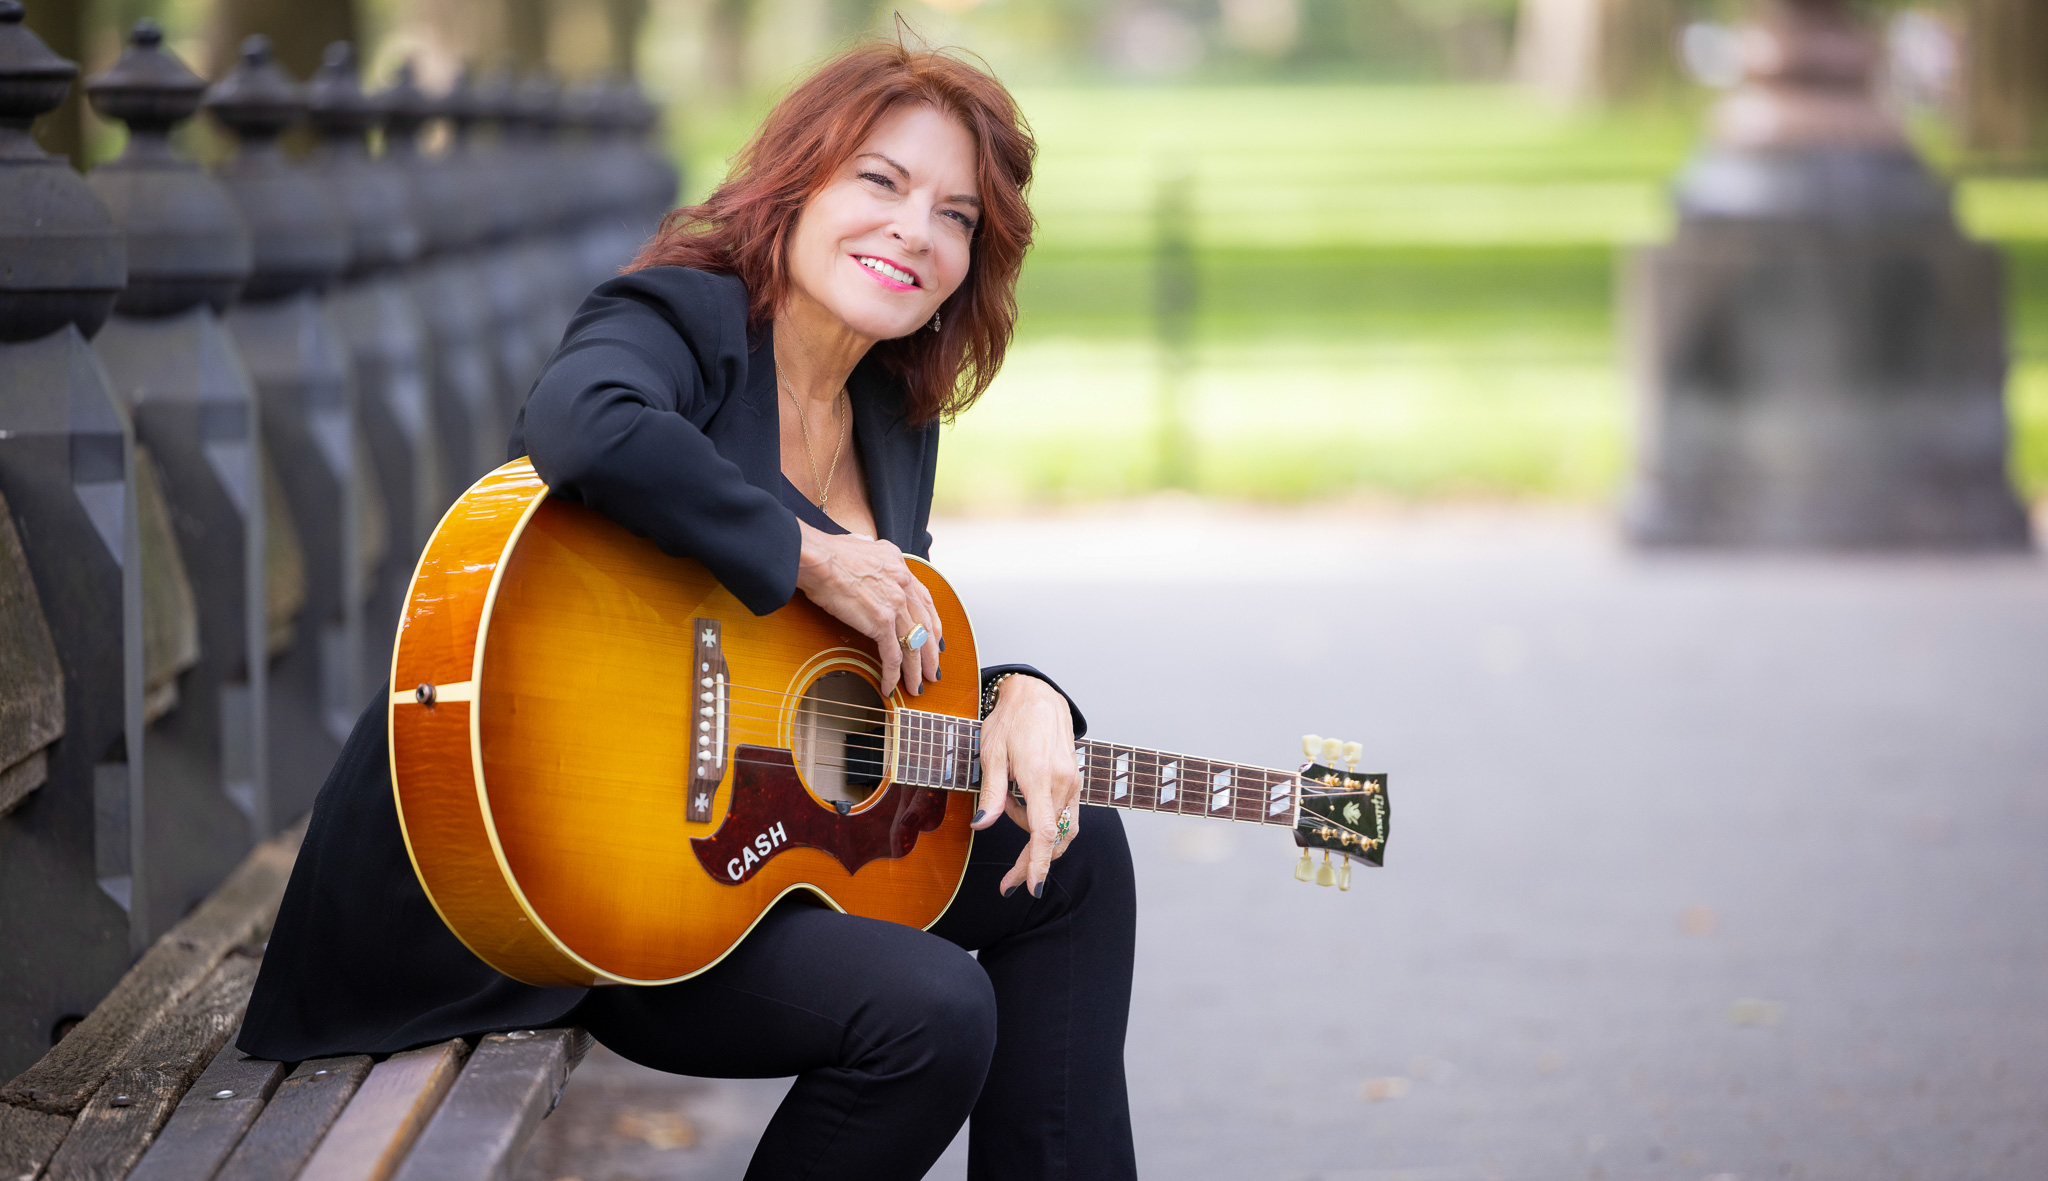 Rosanne Cash sits on a bench with a guitar on her lap and smiles toward the camera